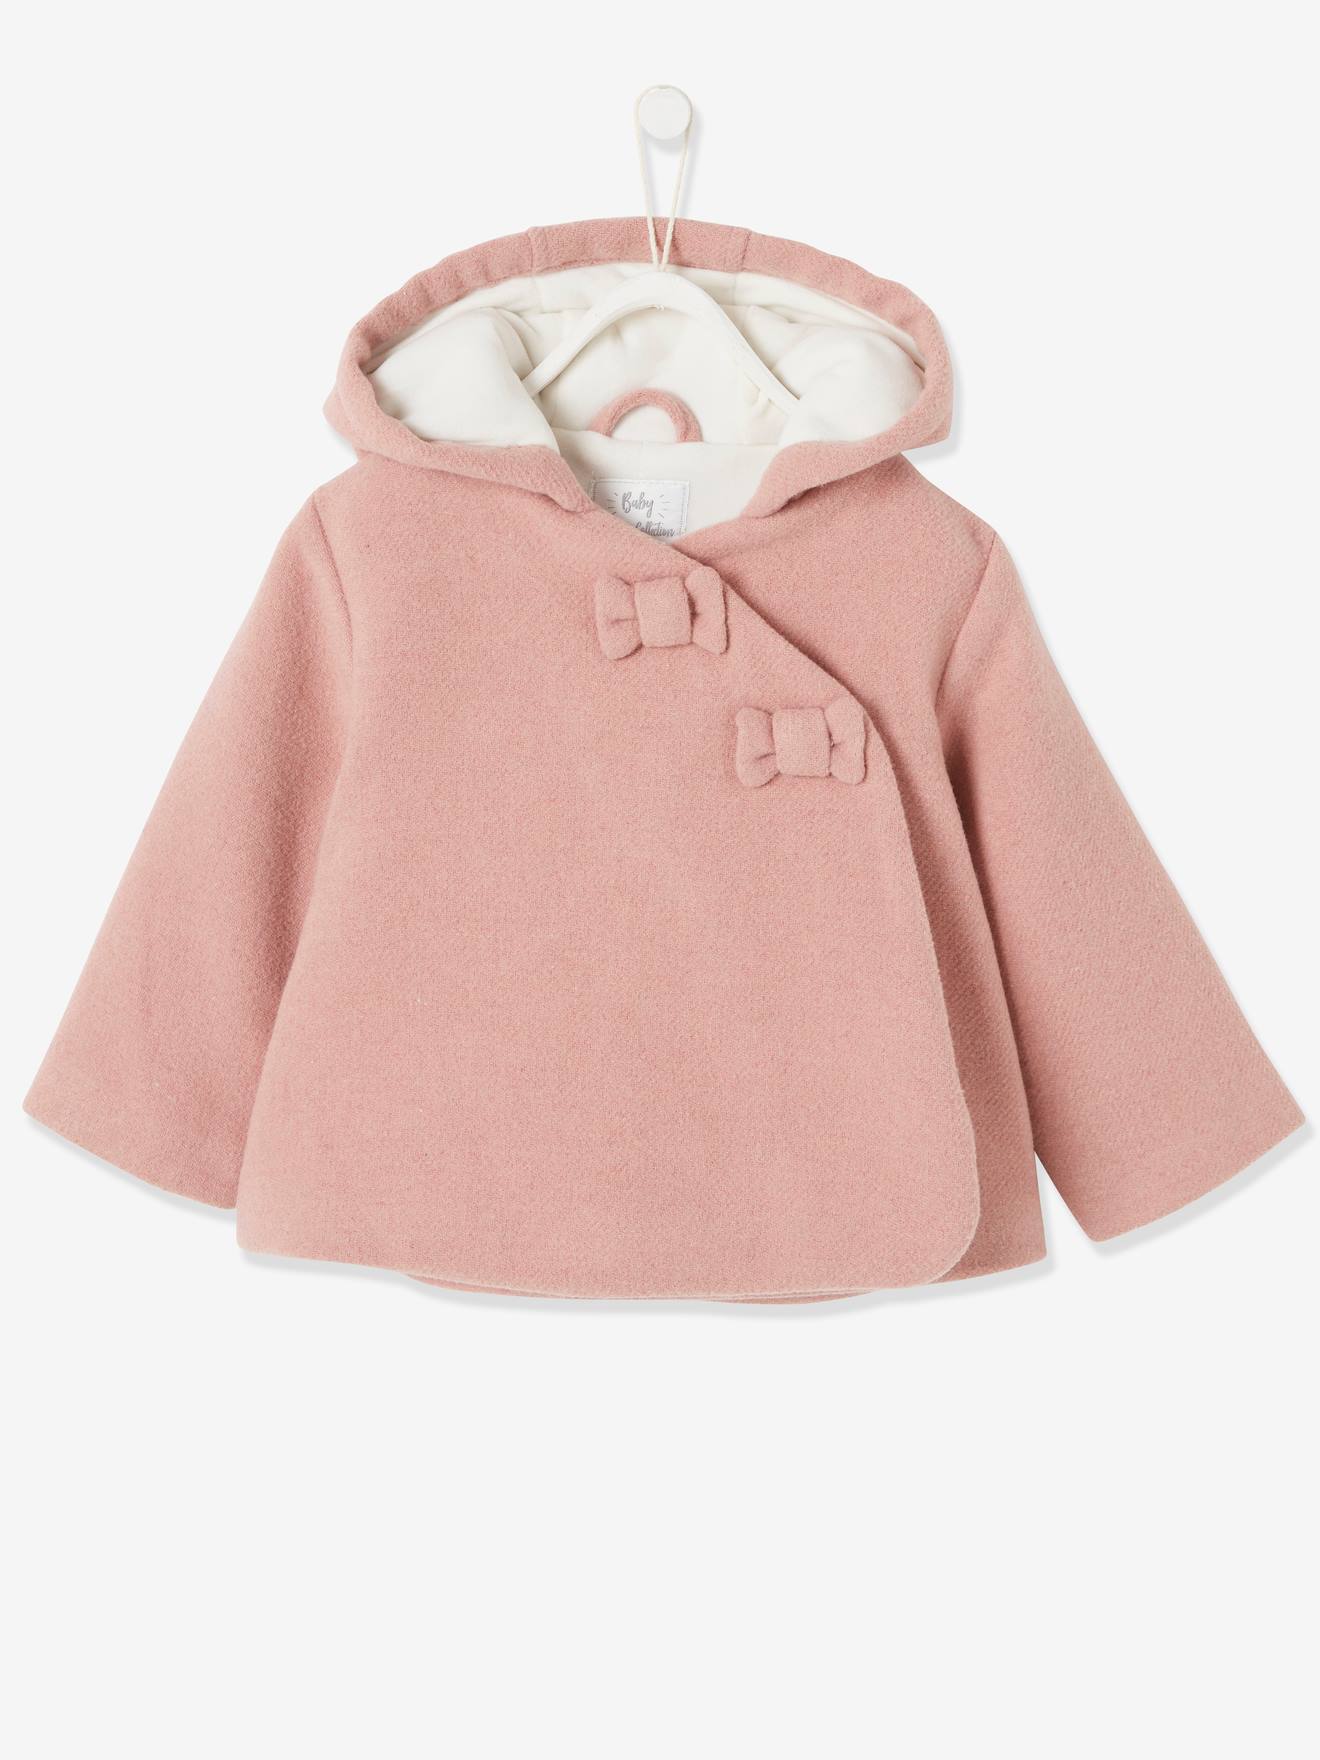 Fabric Coat with Hood, Lined & Padded, for Baby Girls pink